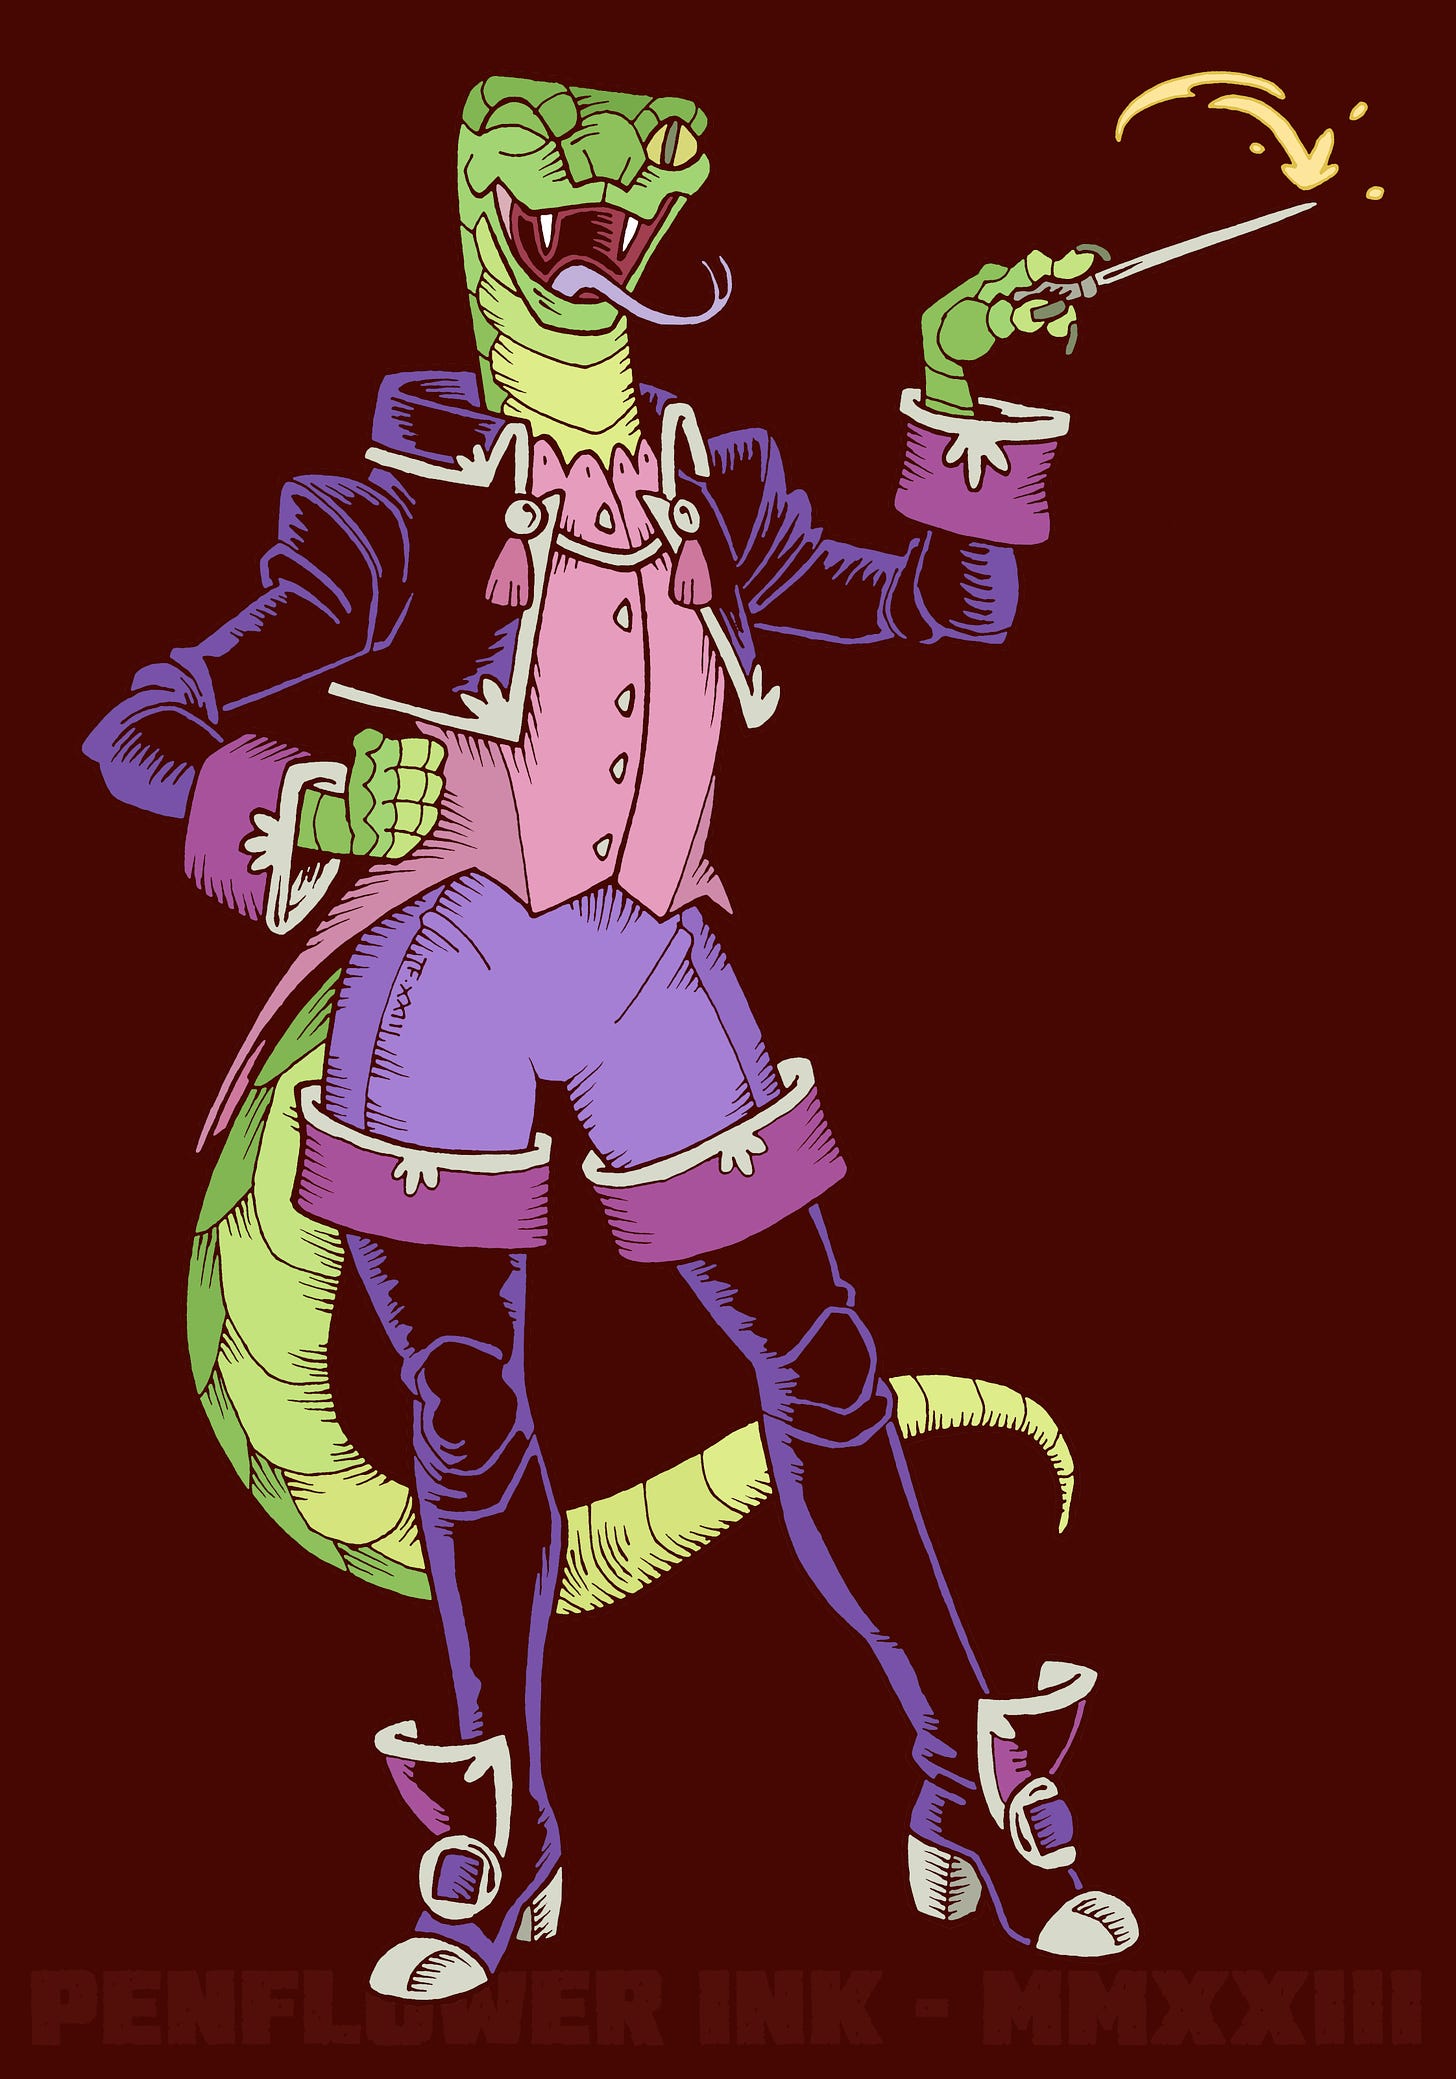 Traditionally hand drawn and digitally coloured illustration of a female snake-person, with green scales, fangs and a long tail. She is wearing a fancy stage magician outfit, with purple jacket and thigh-high boots with silver trim, over a pink waist-coat and purple leggings. She is smiling and winking while waving a magic wand.